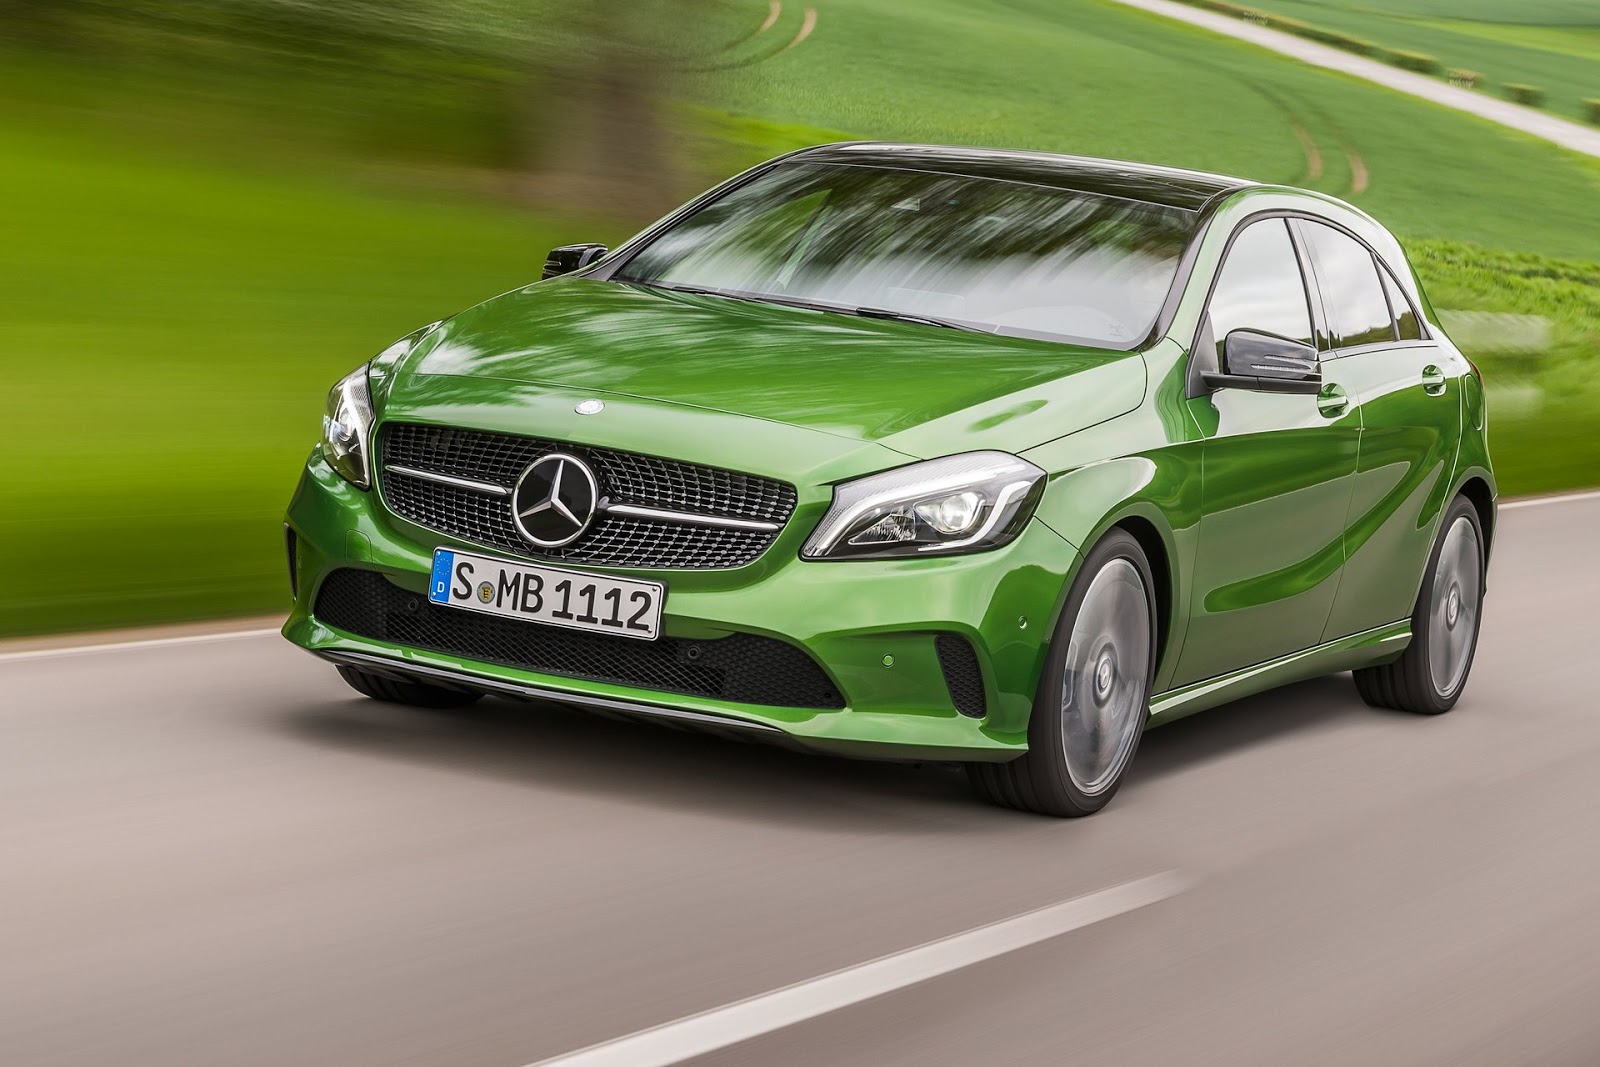 Mercedes Benz A-Class 2017 Review, Specification, and Price ...